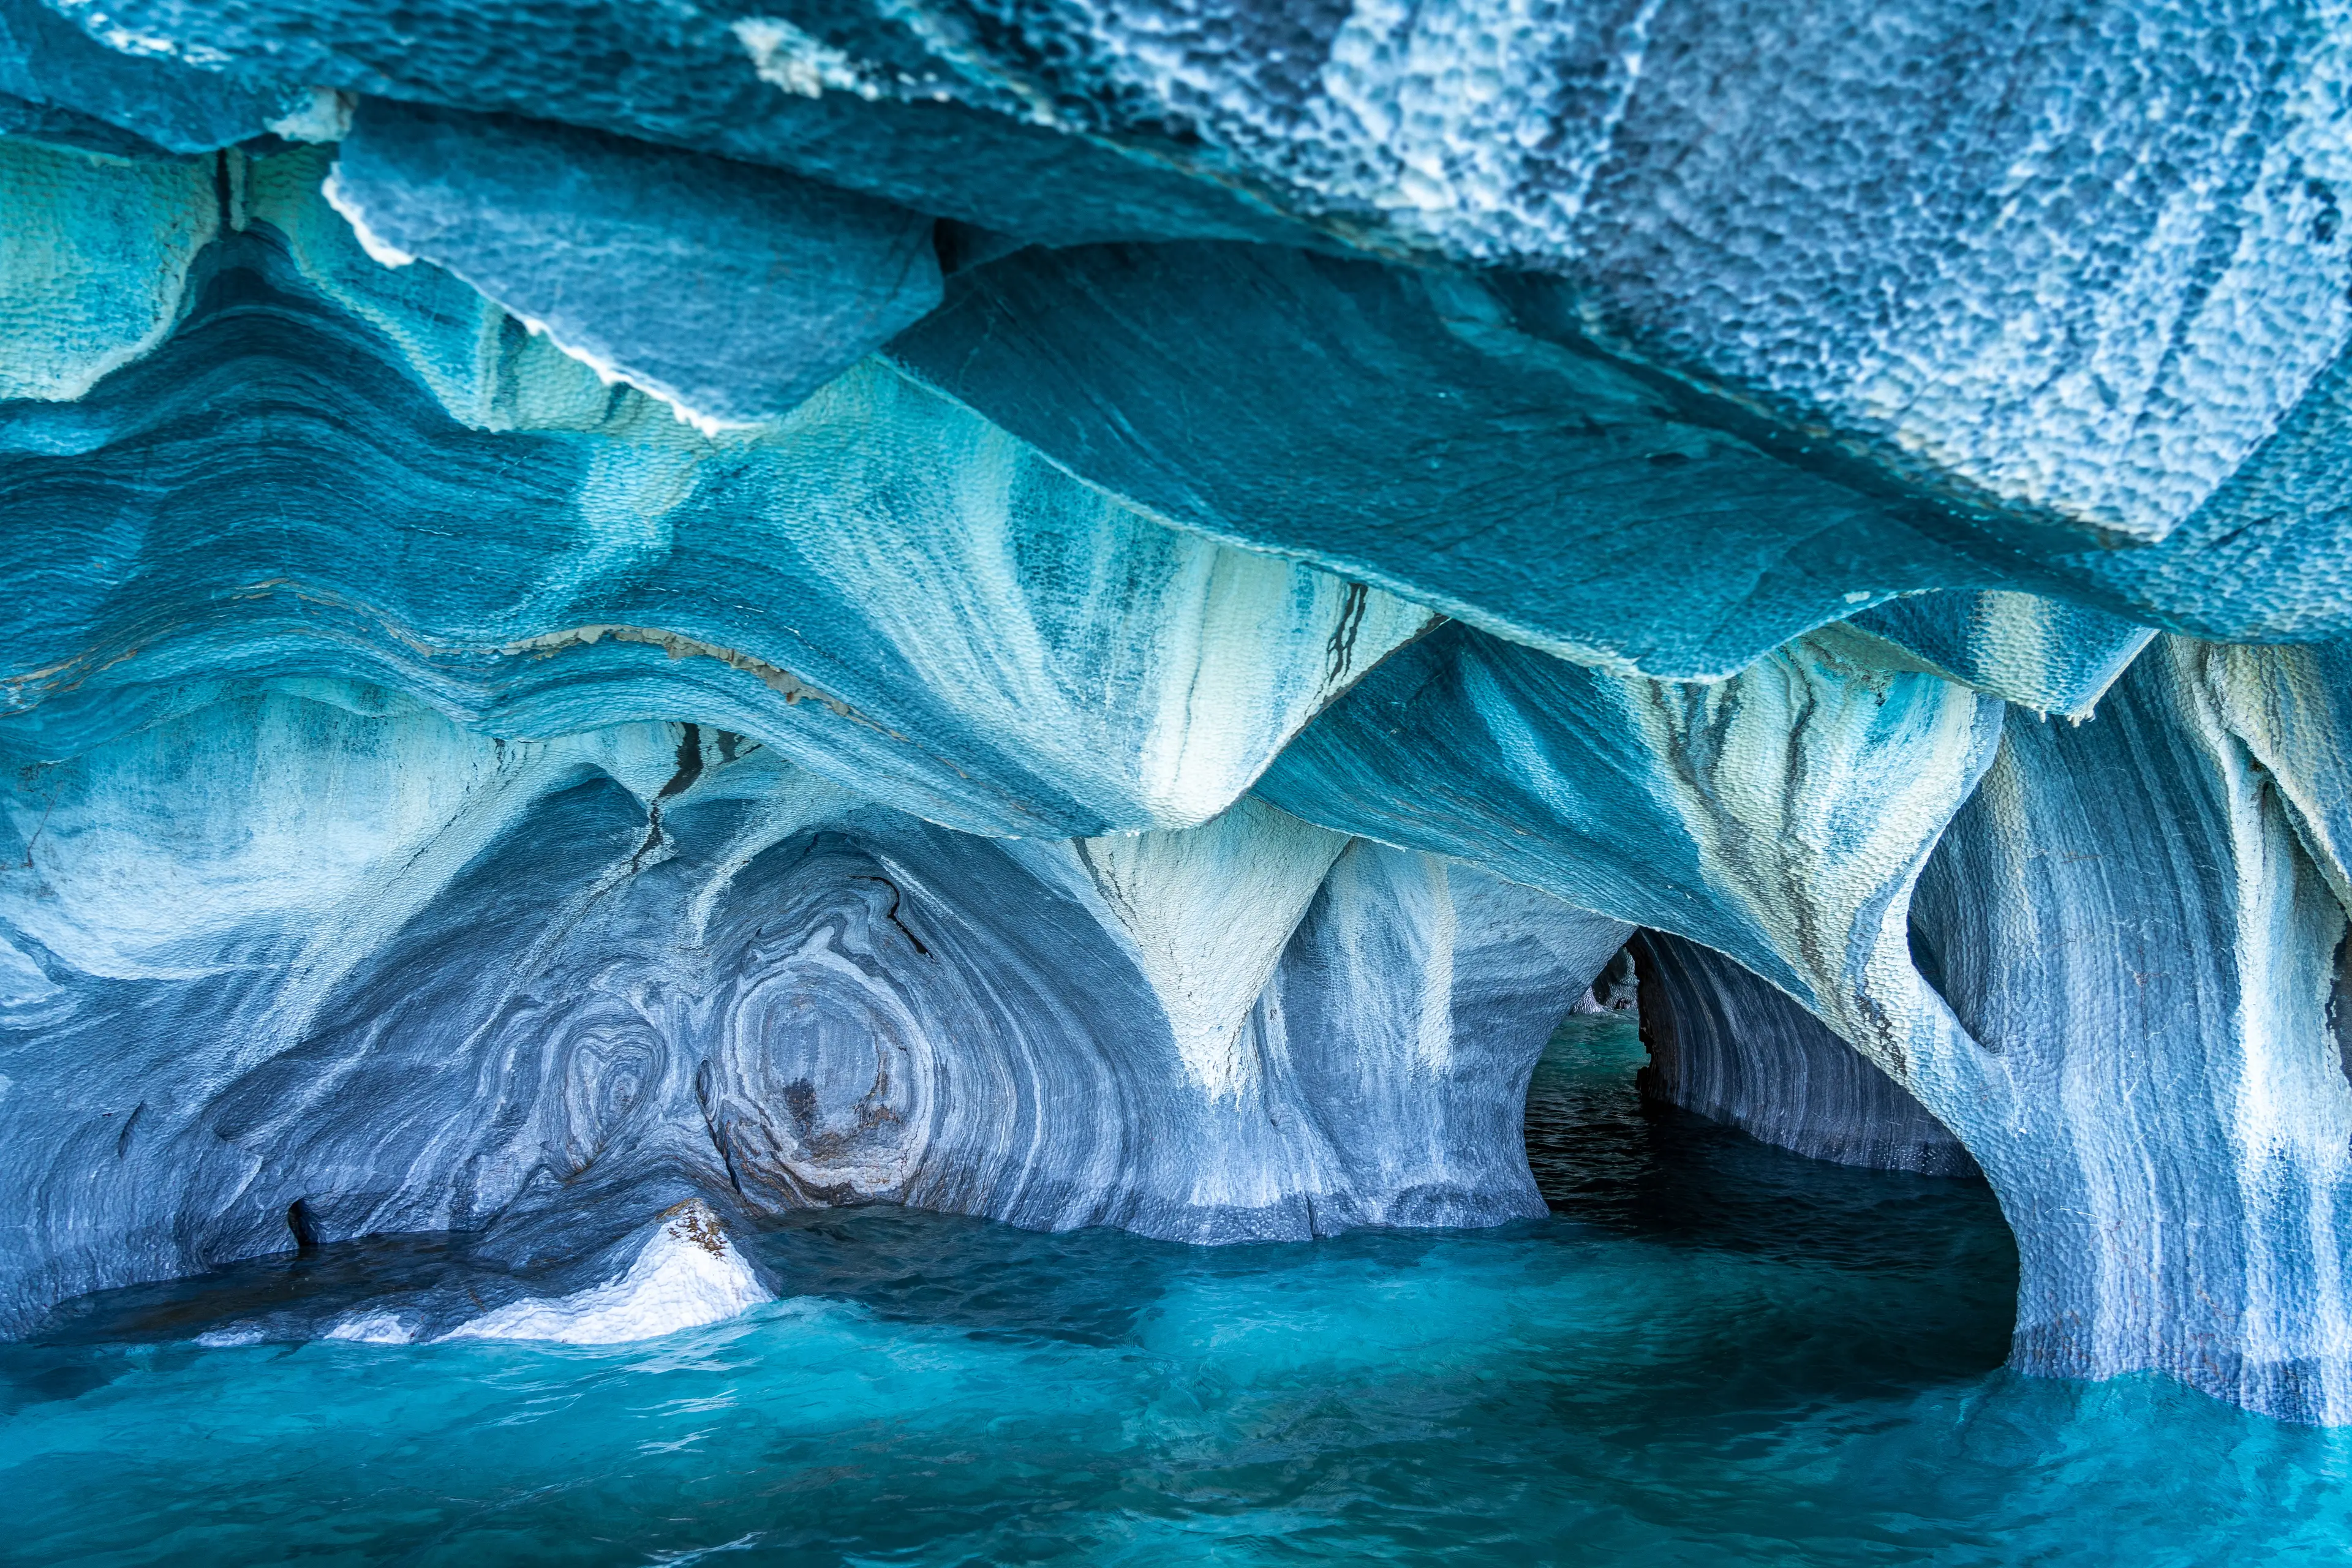 The Marble caves of the Carrera lake area